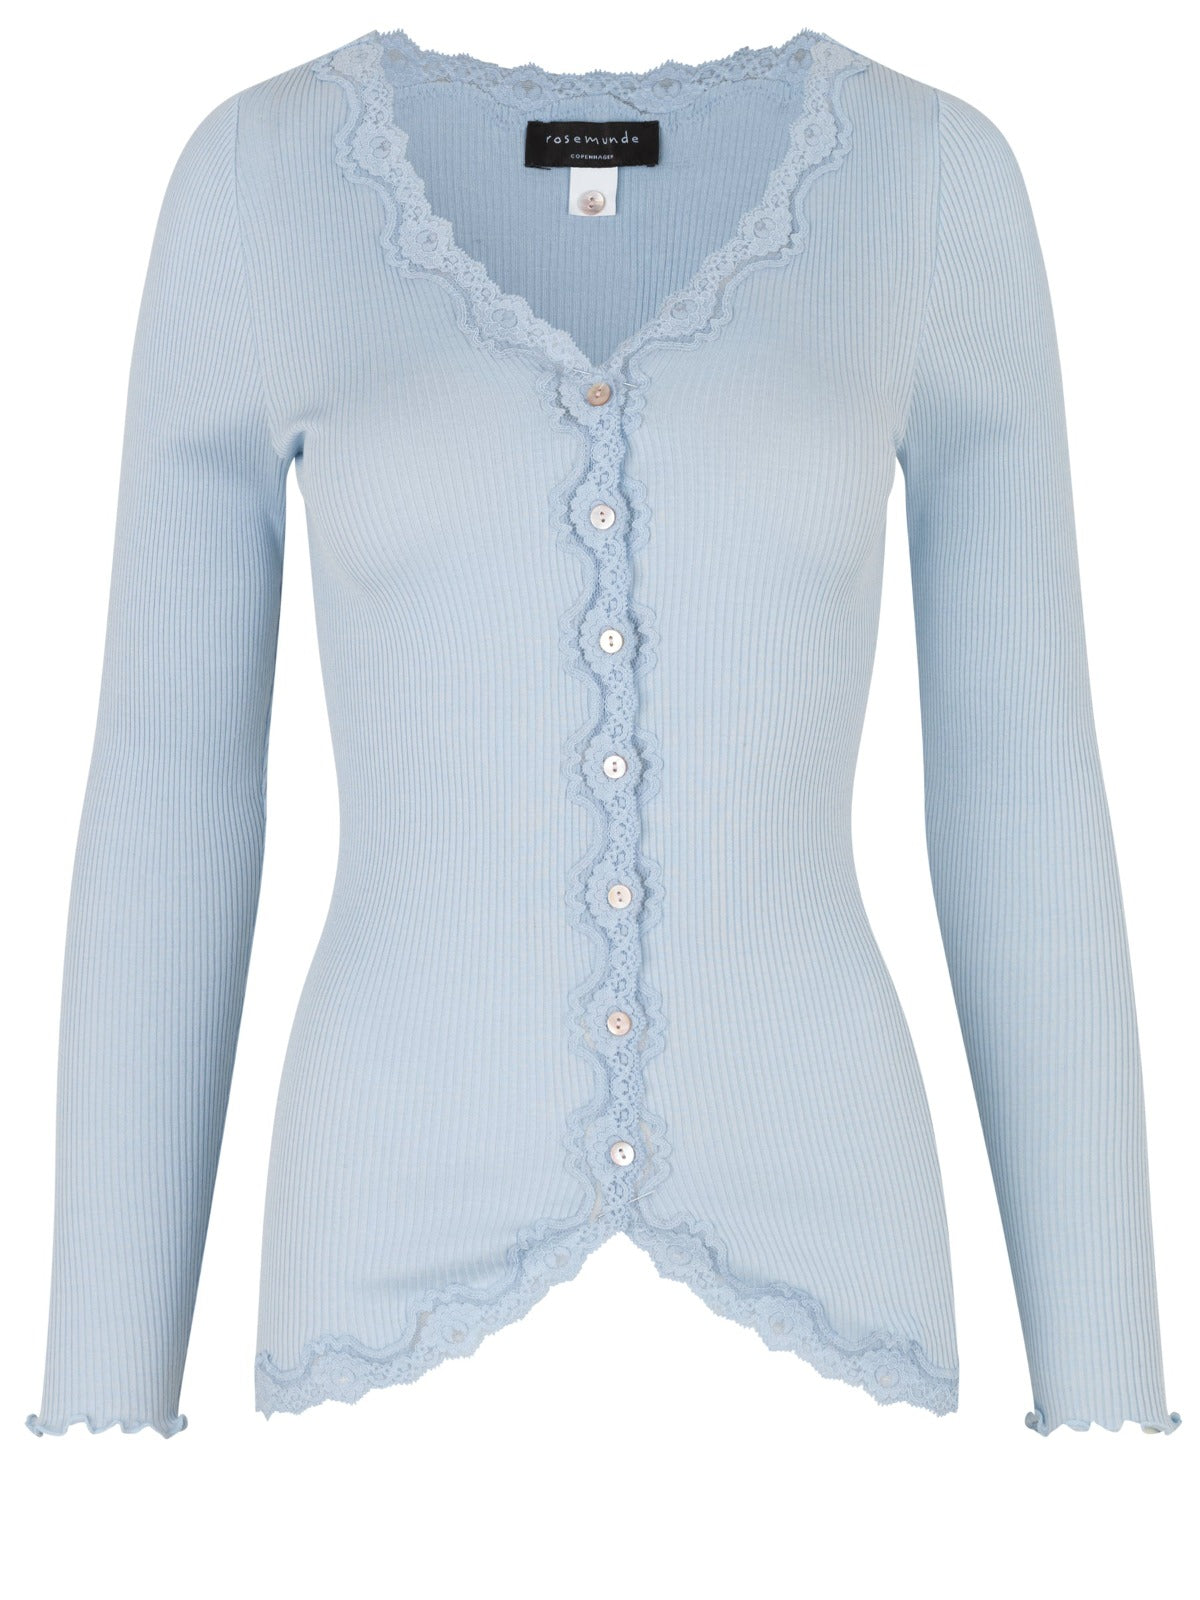 Rosemunde lace cardigan top 5420 (available in different colours) - Lucindas on-line